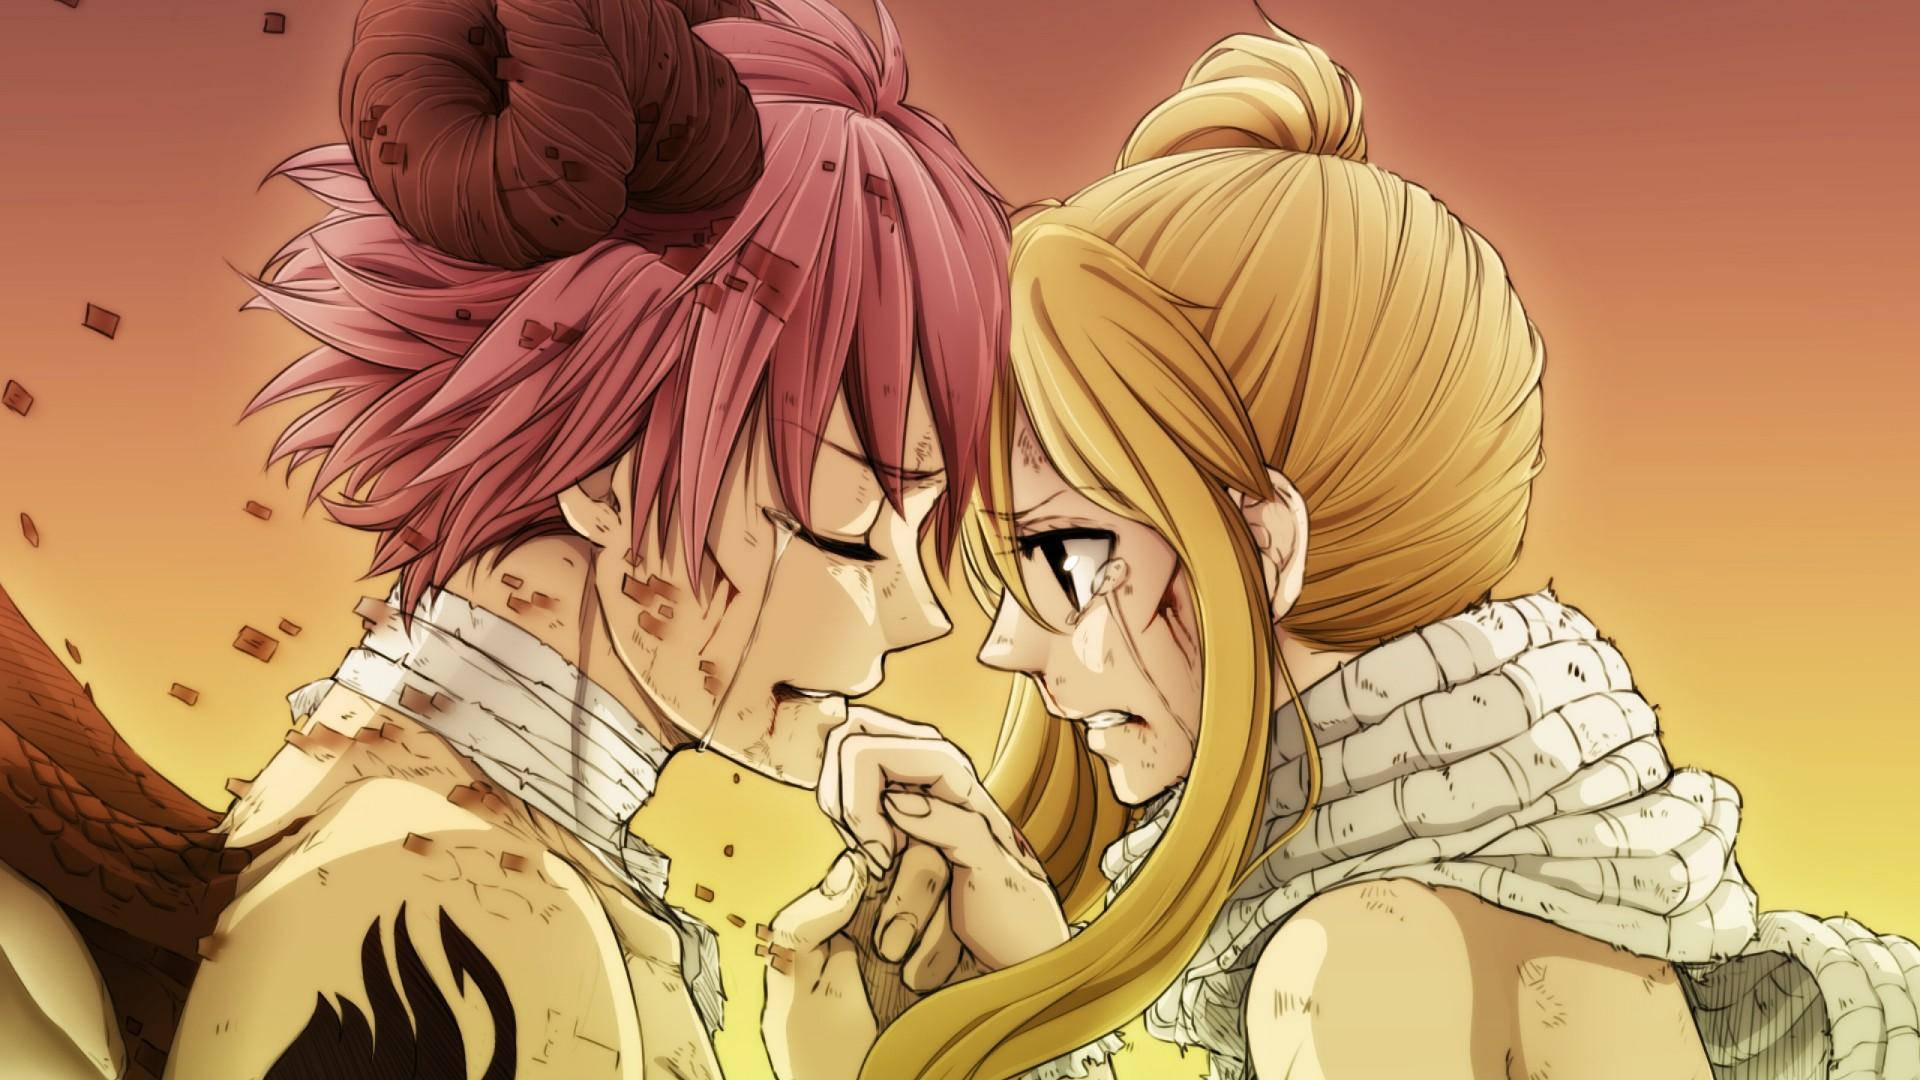 Fairy Tail Natsu With Lucy Wallpaper